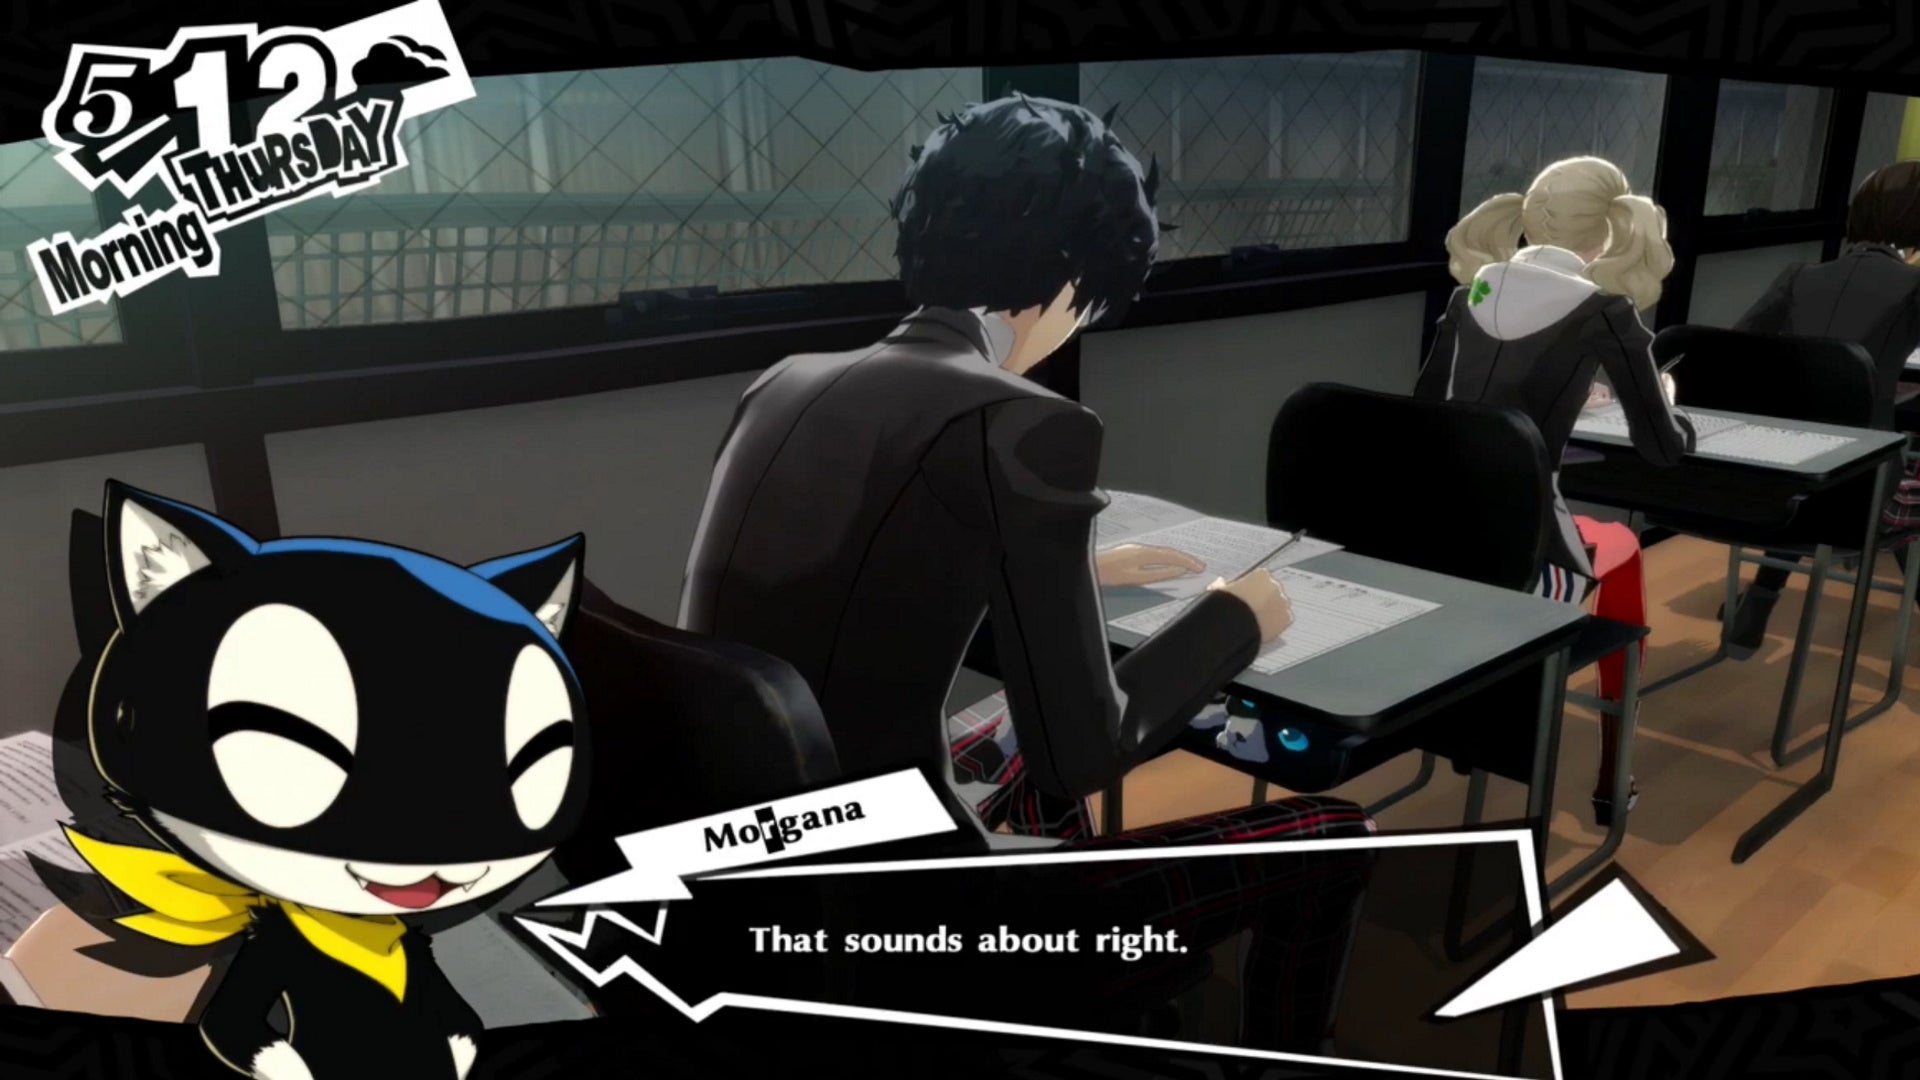 Persona 5 Royal classroom answers May: An anime cat tells an anime young man that his exam answer is probably correct